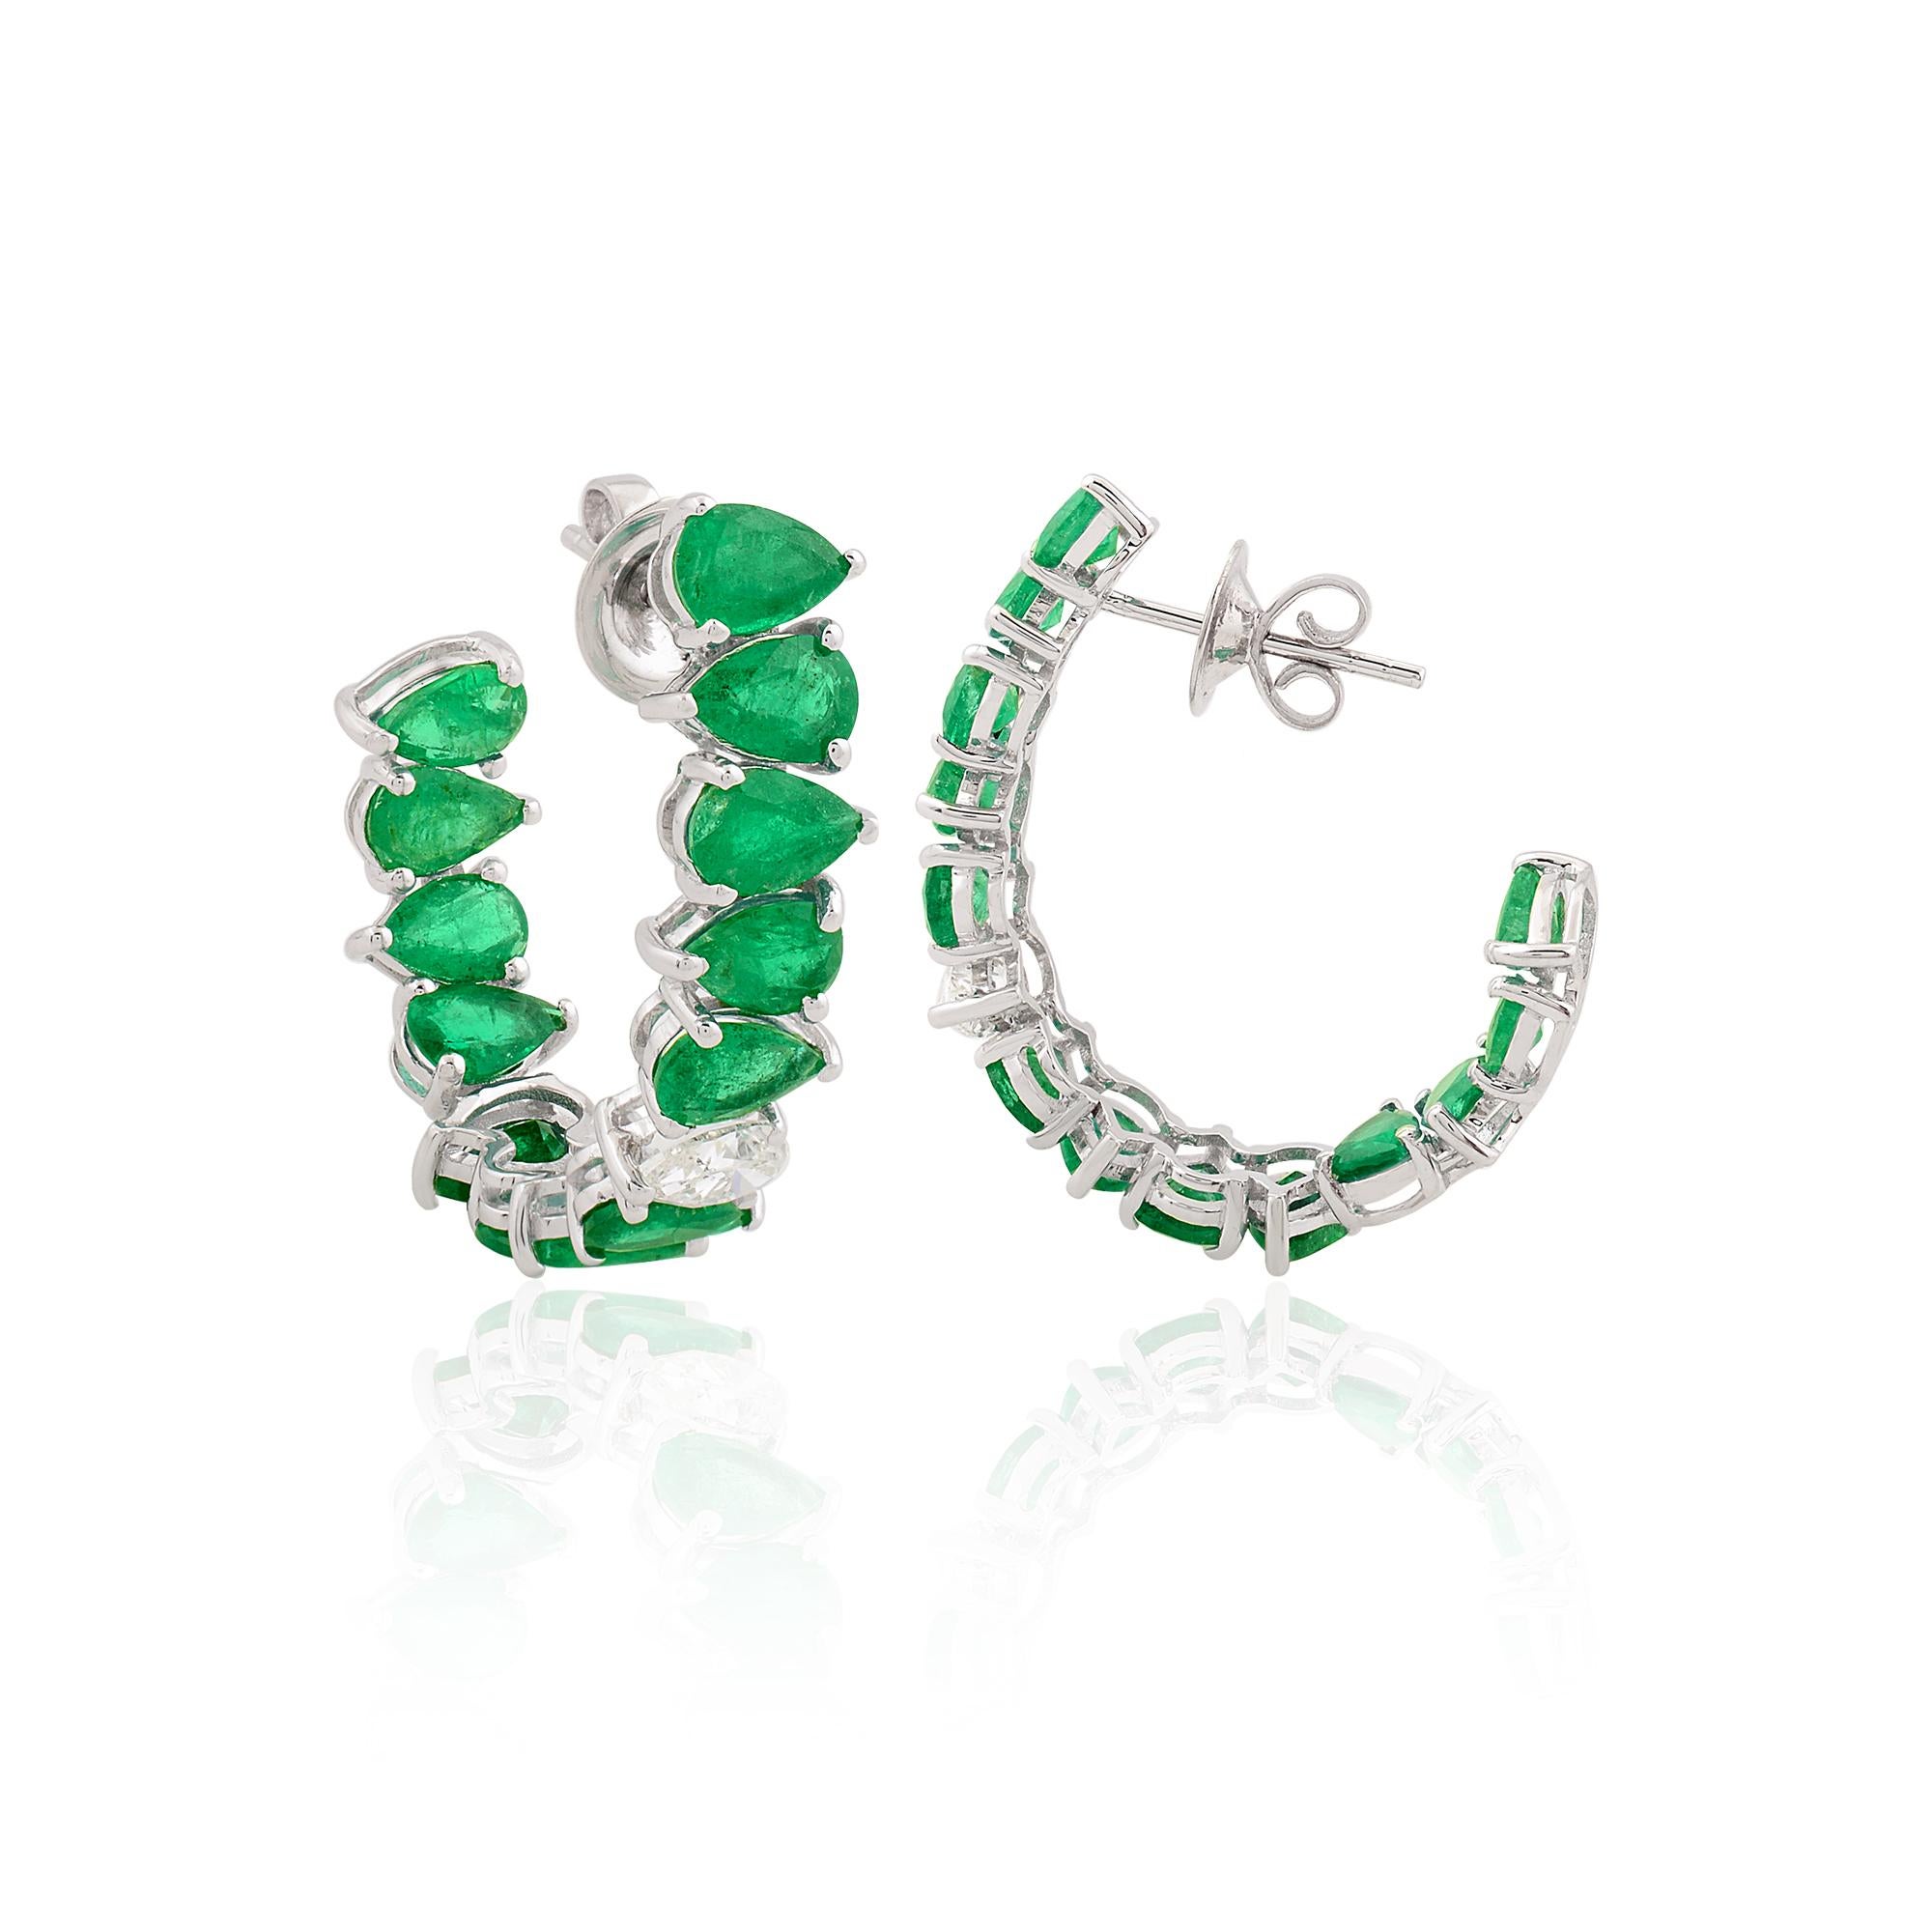 Item Code :- SEE-1639A
Gross Wt :- 9.42 gm 
18k Solid White Gold Wt :- 7.41 gm
Natural Diamond Wt :- 0.80 ct ( AVERAGE DIAMOND CLARITY SI1-SI2 & COLOR H-I )
Emerald Wt :- 9.24 ct
Earrings Size :- 32x20 mm approx.

✦ Sizing
.....................
We